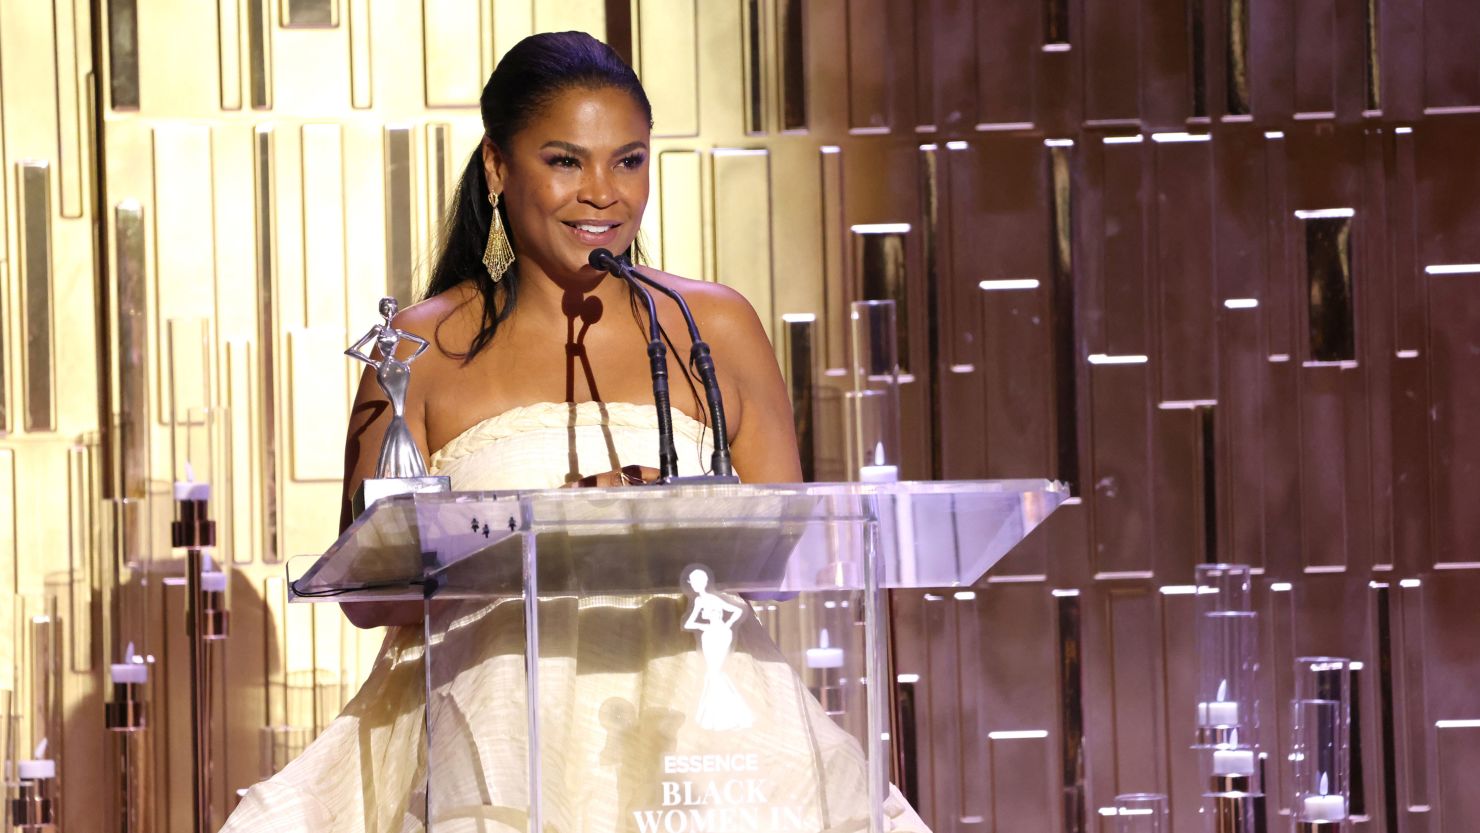 Actress Nia Long to speak at Indianapolis event